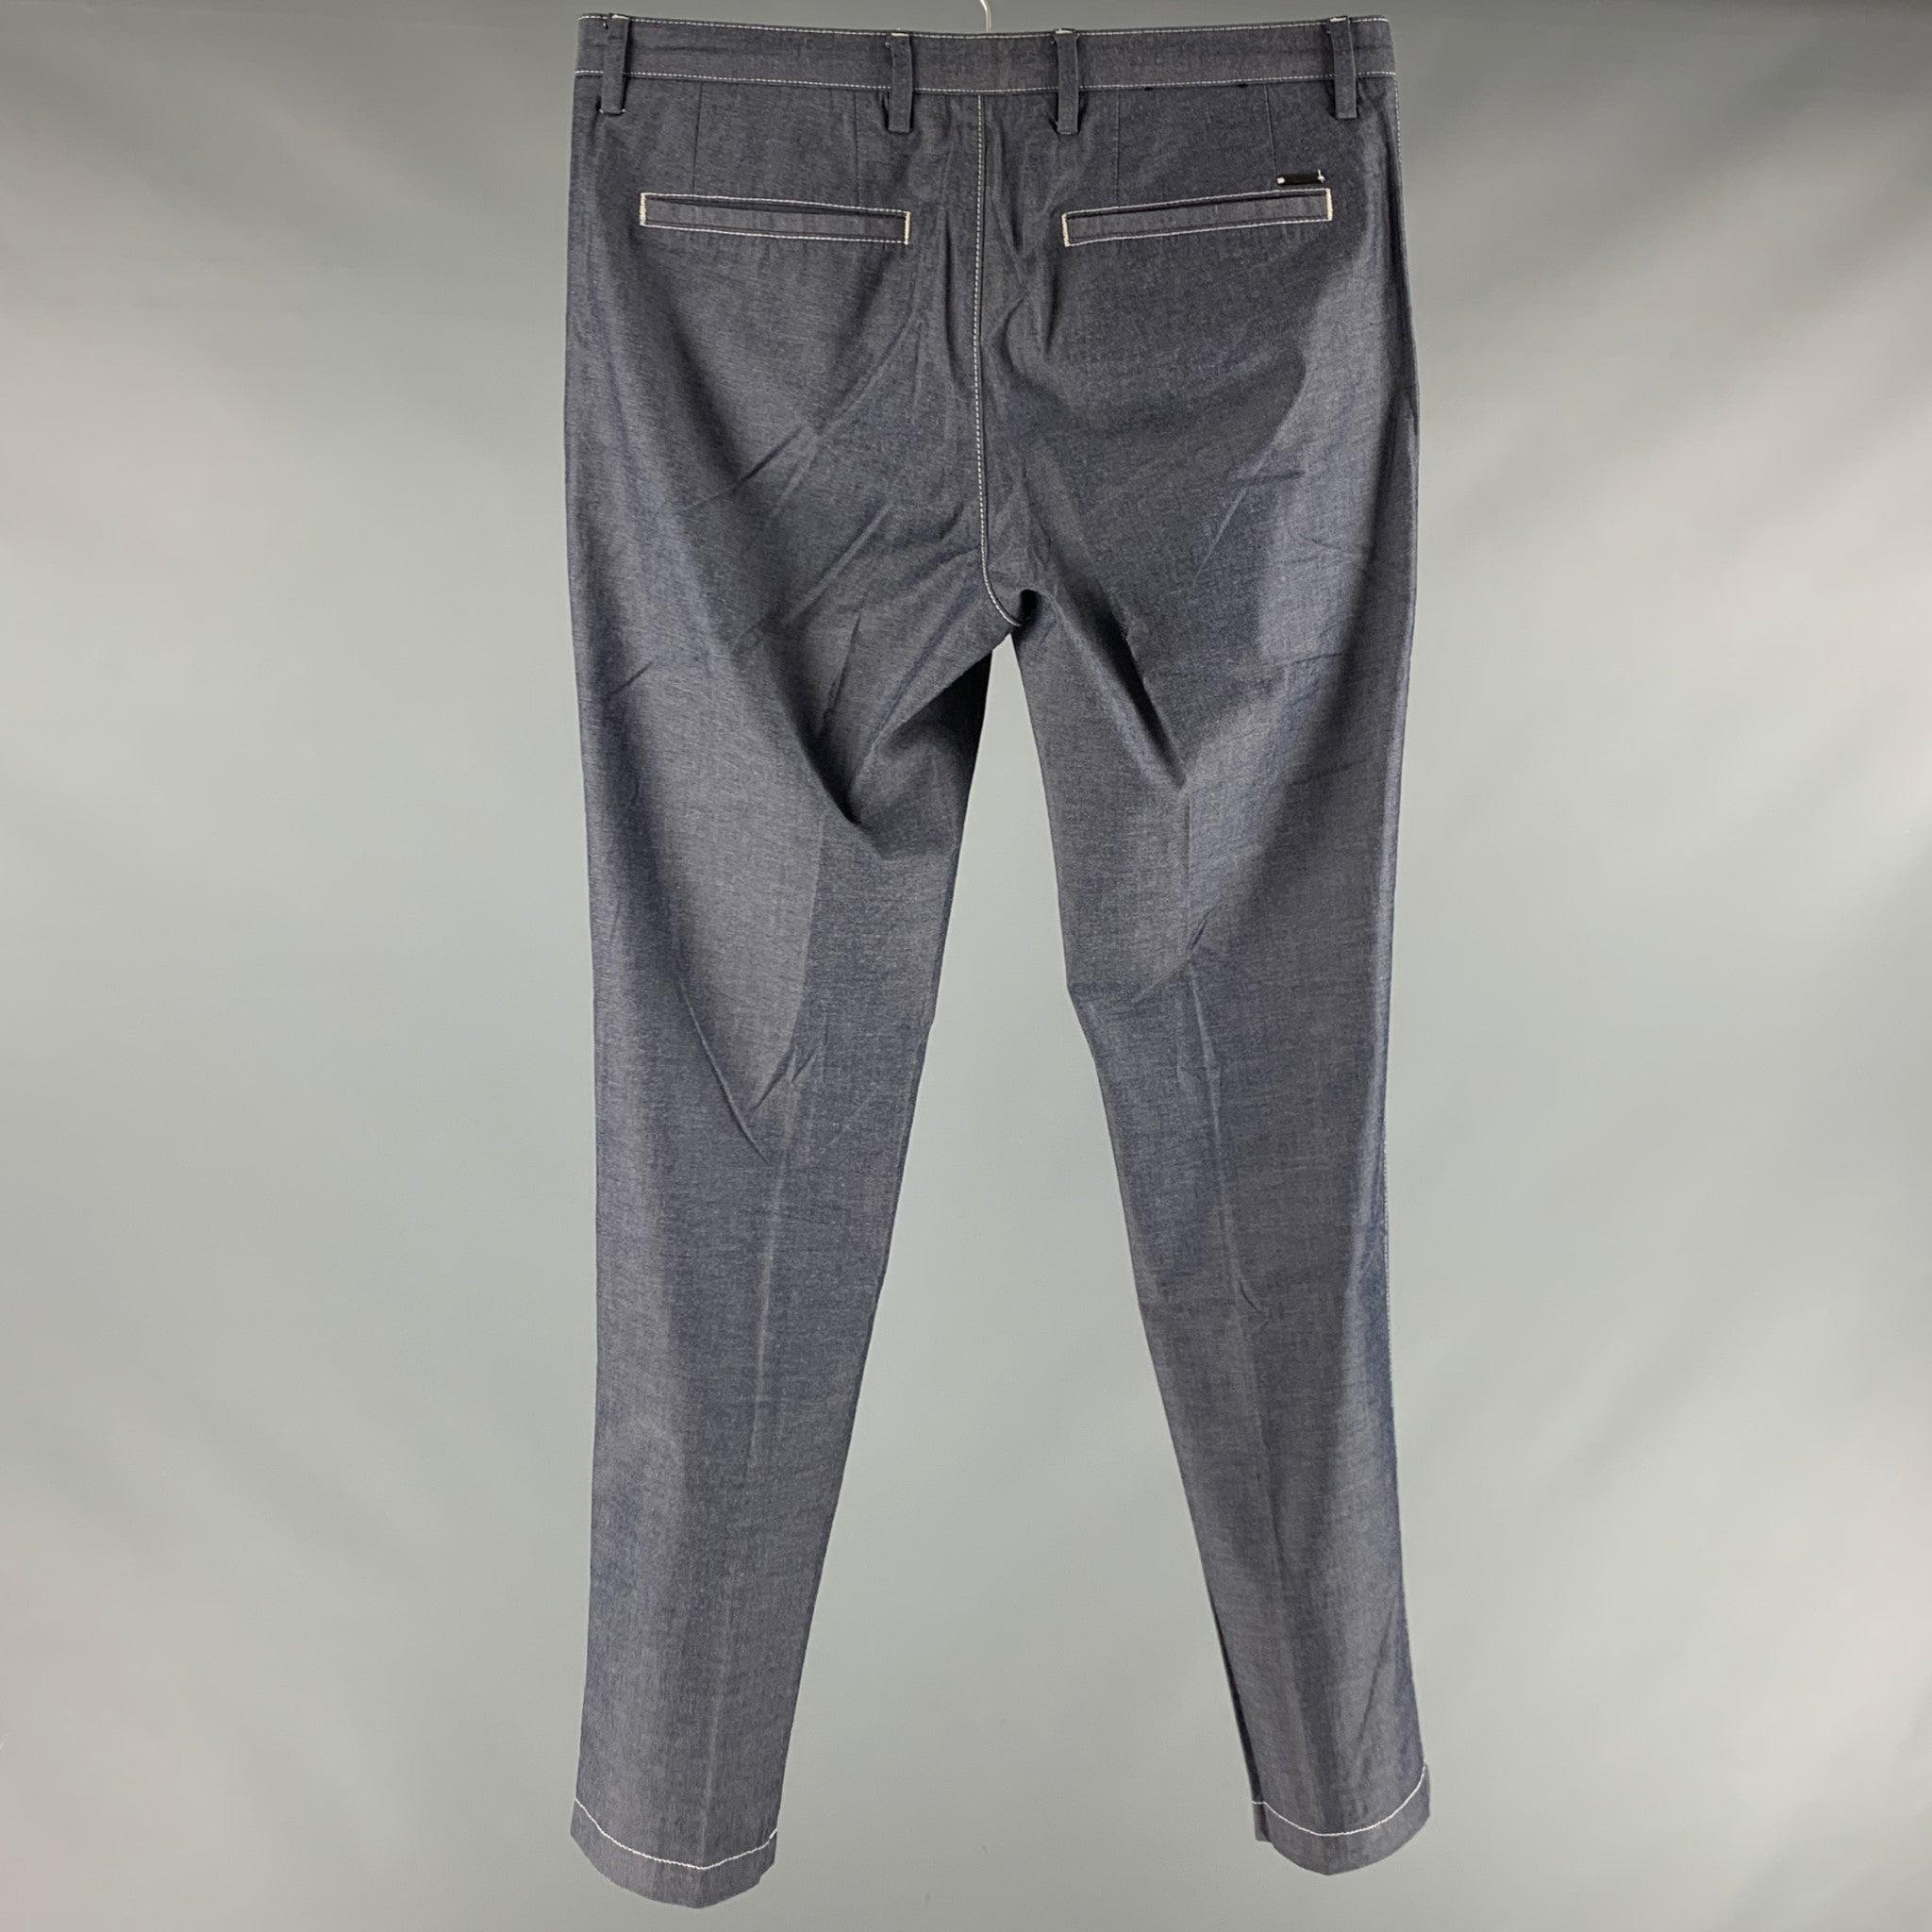 HUGO BOSS casual pants
in a
grey cotton blend fabric featuring flat front style, white contrast stitching, and a zip fly closure.Very Good Pre-Owned Condition. 

Marked:   IT 46 

Measurements: 
  Waist: 30 inches Rise: 8.5 inches Inseam: 32 inches